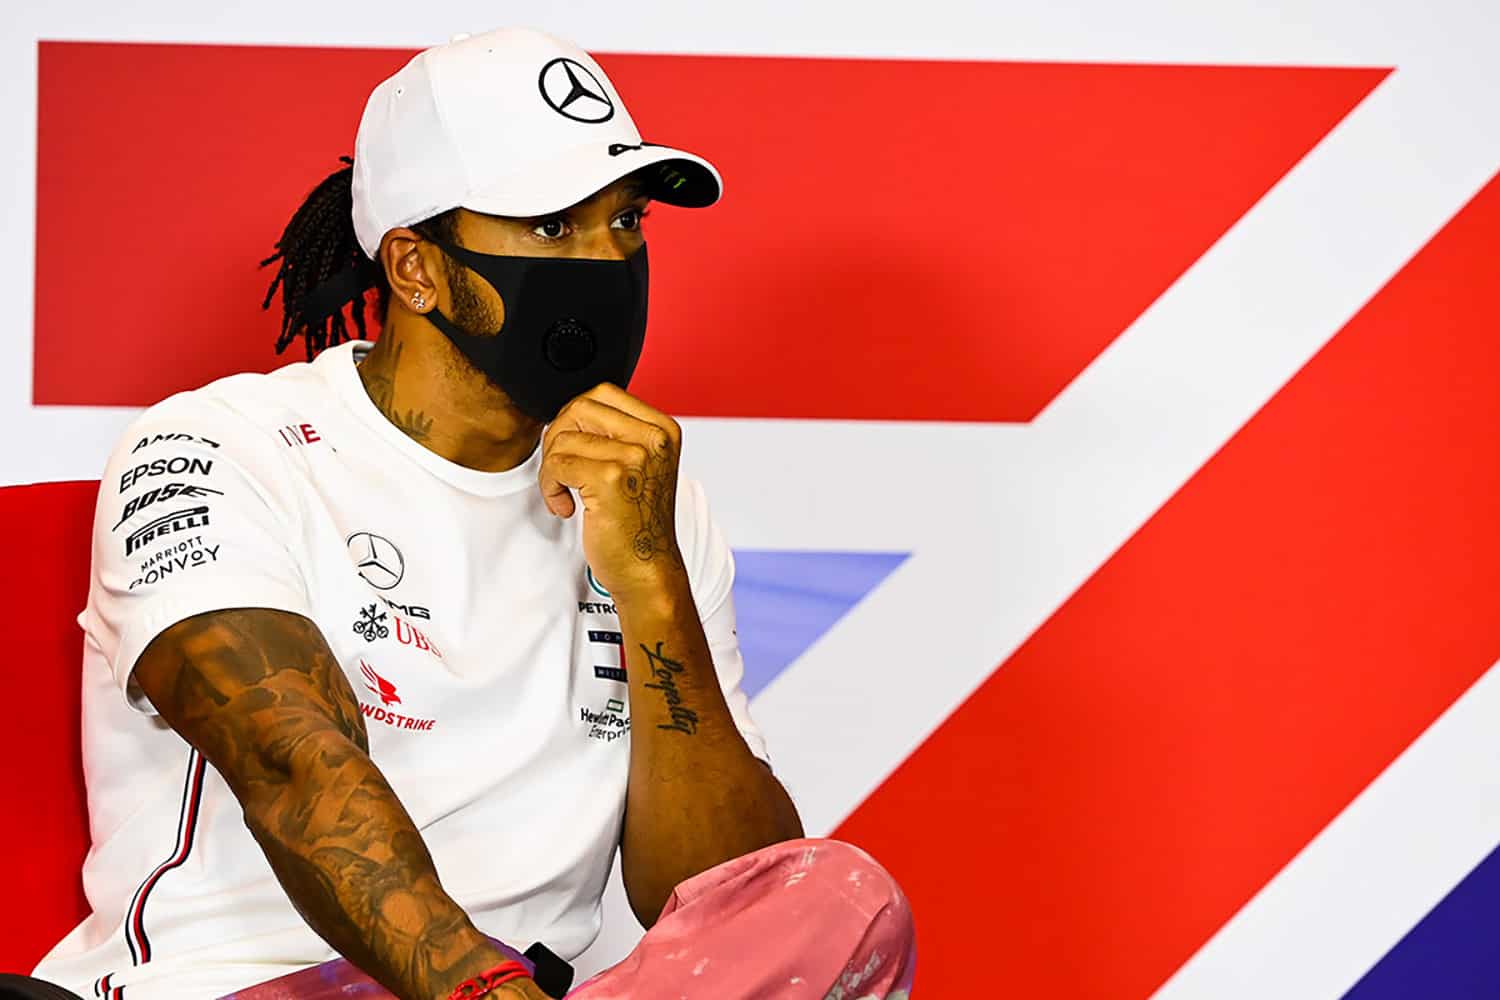 Lewis Hamilton’s ‘Classy’ Salary Move Proves Money Isn’t Everything In 2020